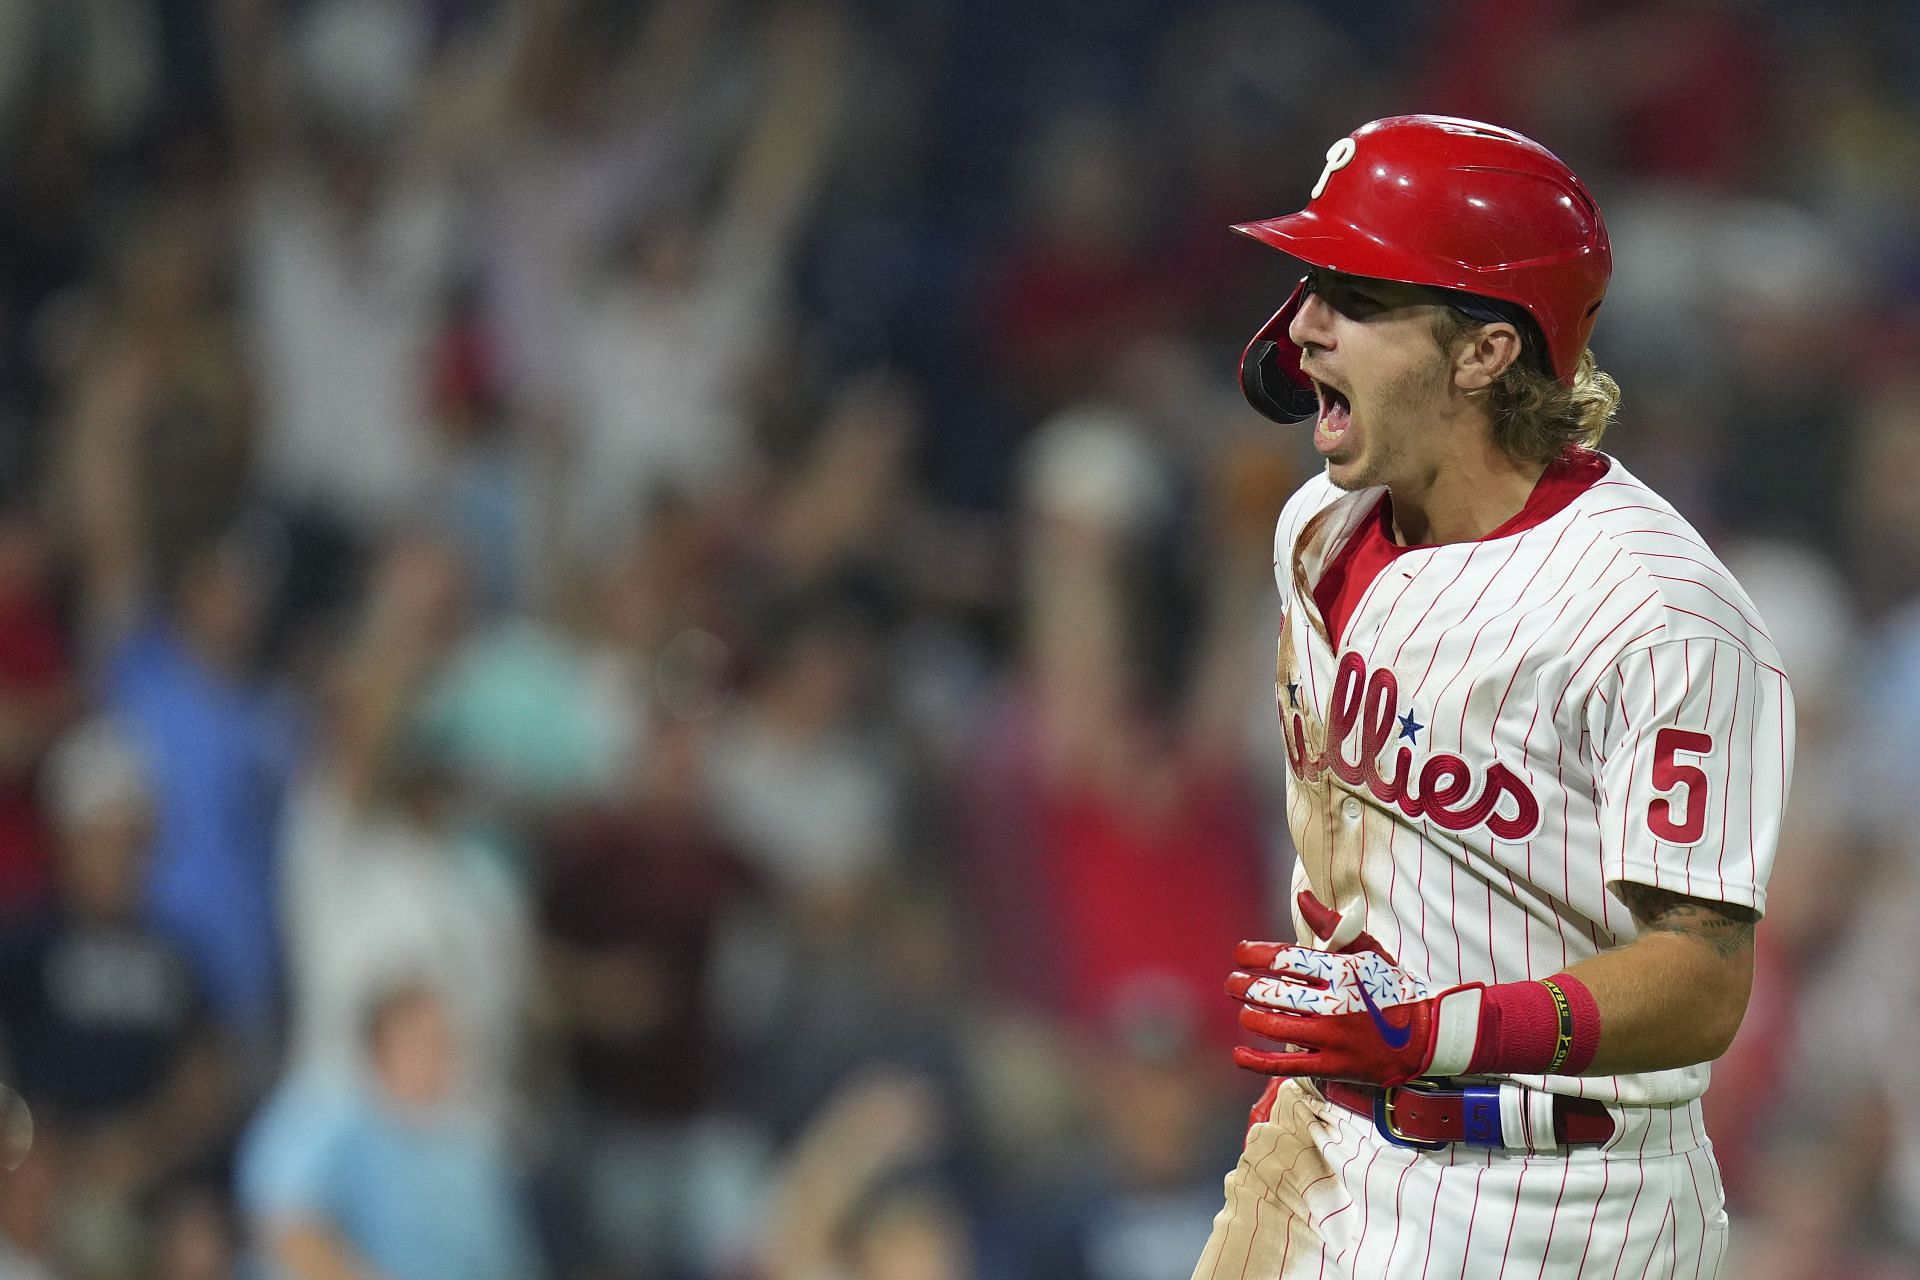 Phillies rookie Bryson Stott made history against Mets ace Max Scherzer on Friday